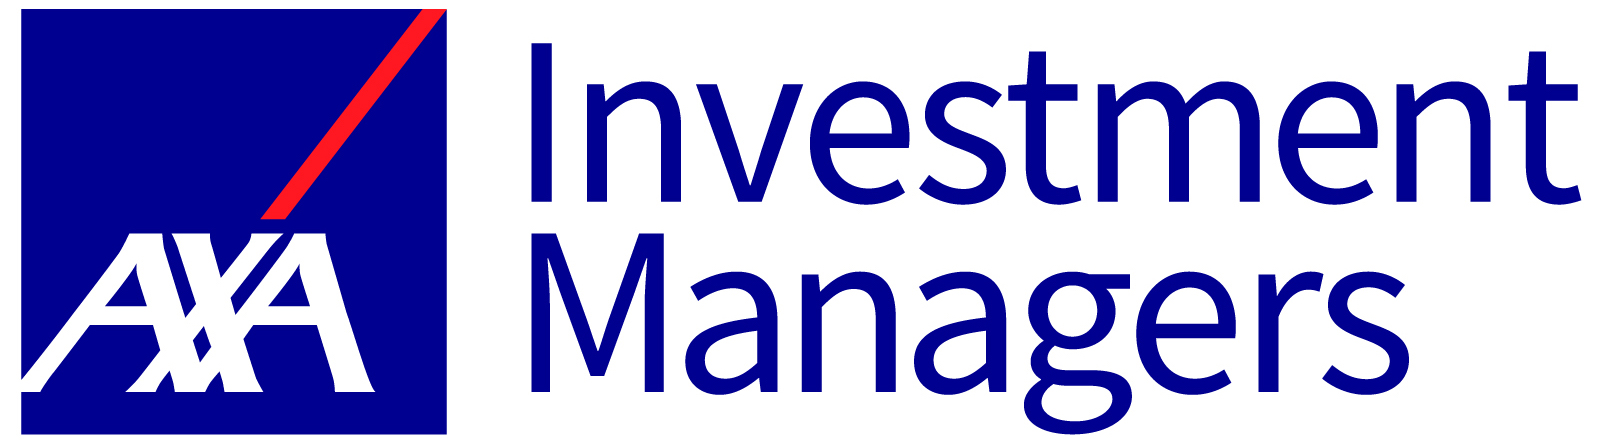 Axa Investement Managers